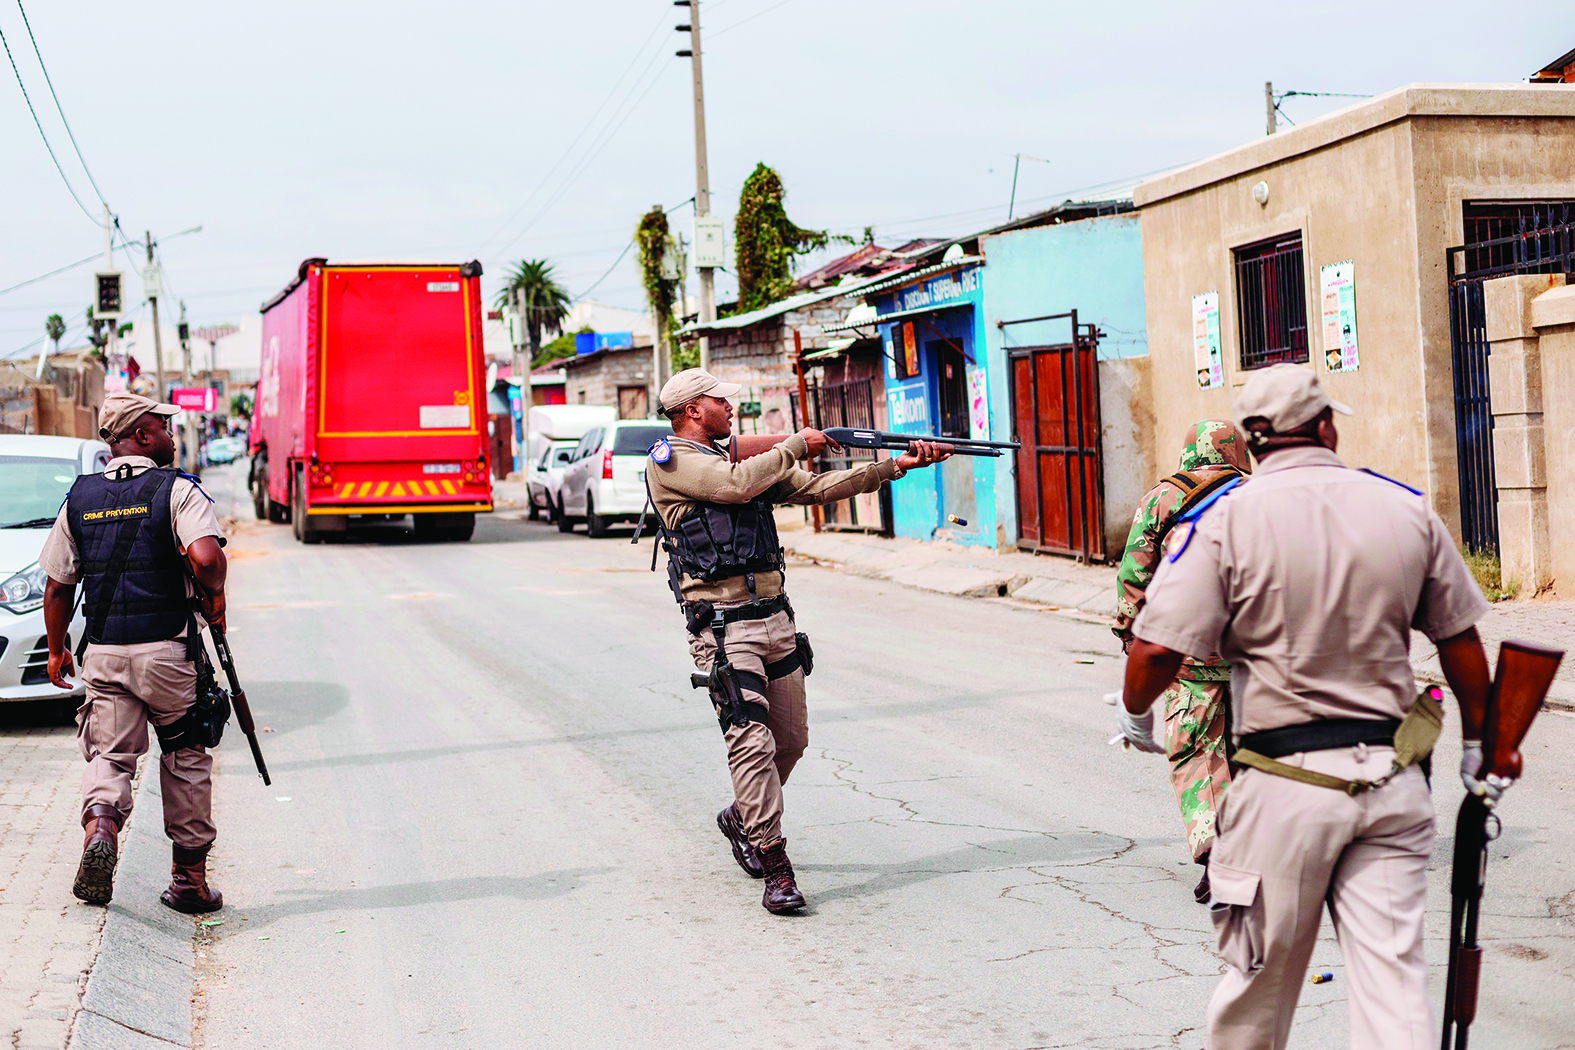 A Gauteng Traffic Police officer fires rubber bullets to urge residents to get inside during a mixed patrol of South African National Defence Force (SANDF) and Gauteng Traffic Police in Alexandra, Johannesburg, on March 31, 2020. - South Africa came under a nationwide lockdown on March 27, 2020, joining other African countries imposing strict curfews and shutdowns in an attempt to halt the spread of the COVID-19 coronavirus across the continent. (Photo by Michele Spatari / AFP)